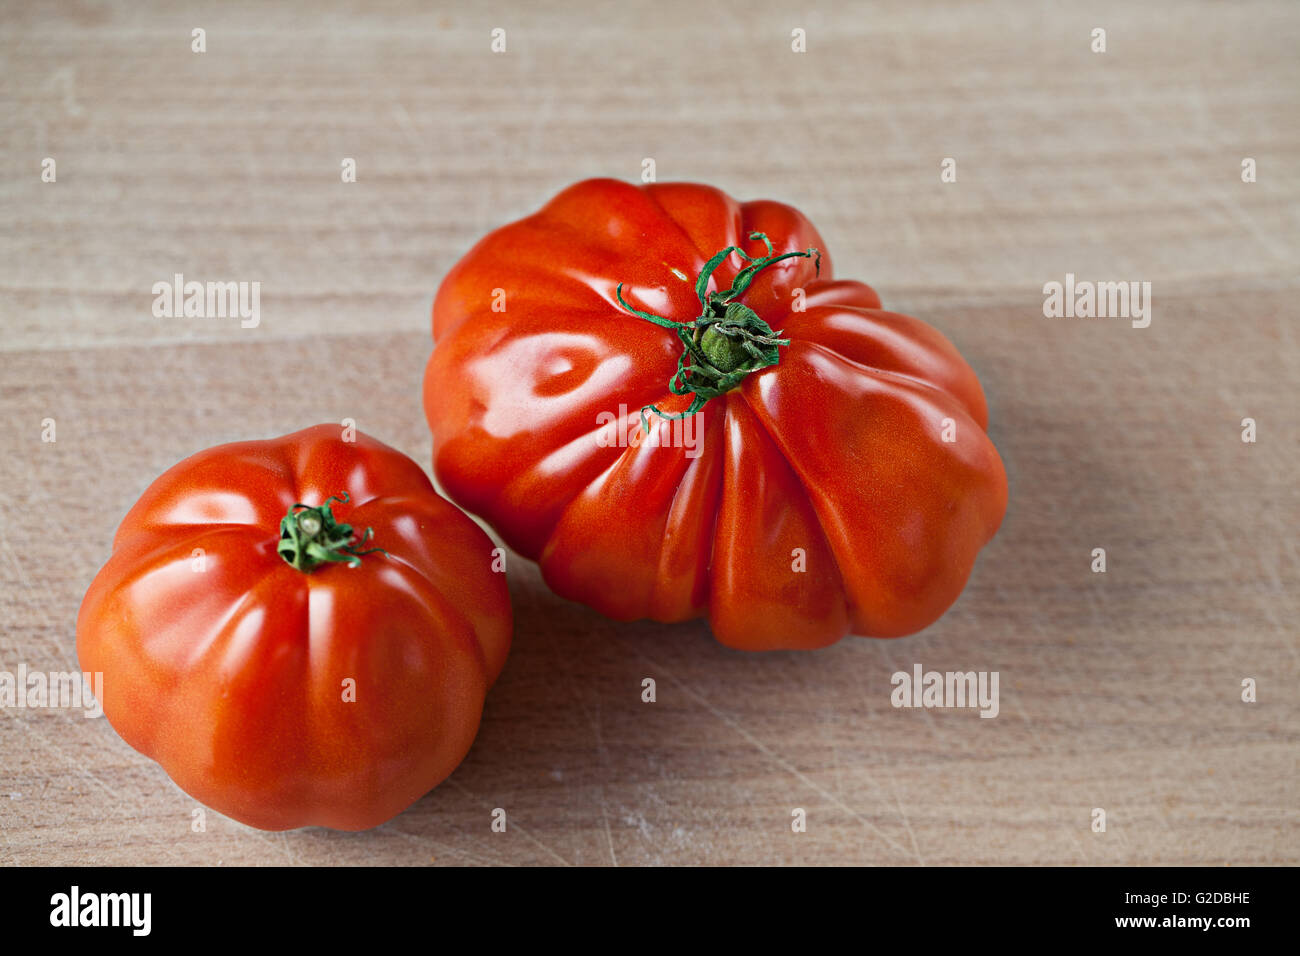 Big and ripe red tomatoes on wooden board Stock Photo